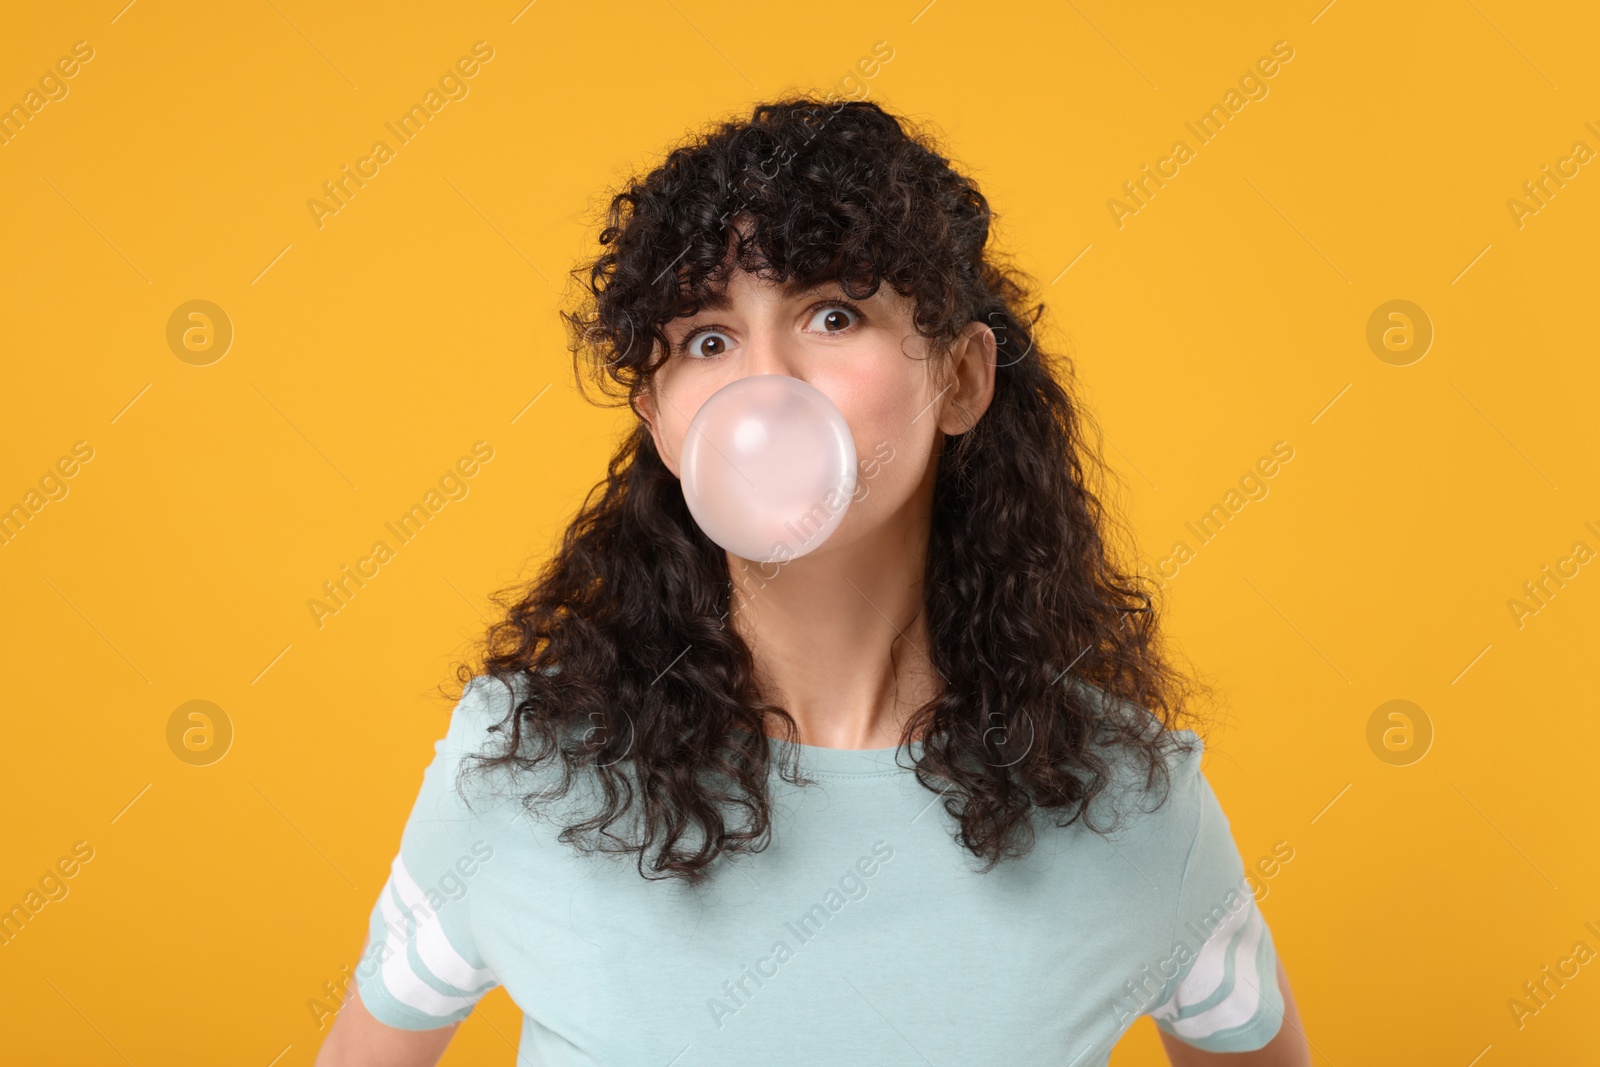 Photo of Beautiful young woman blowing bubble gum on orange background